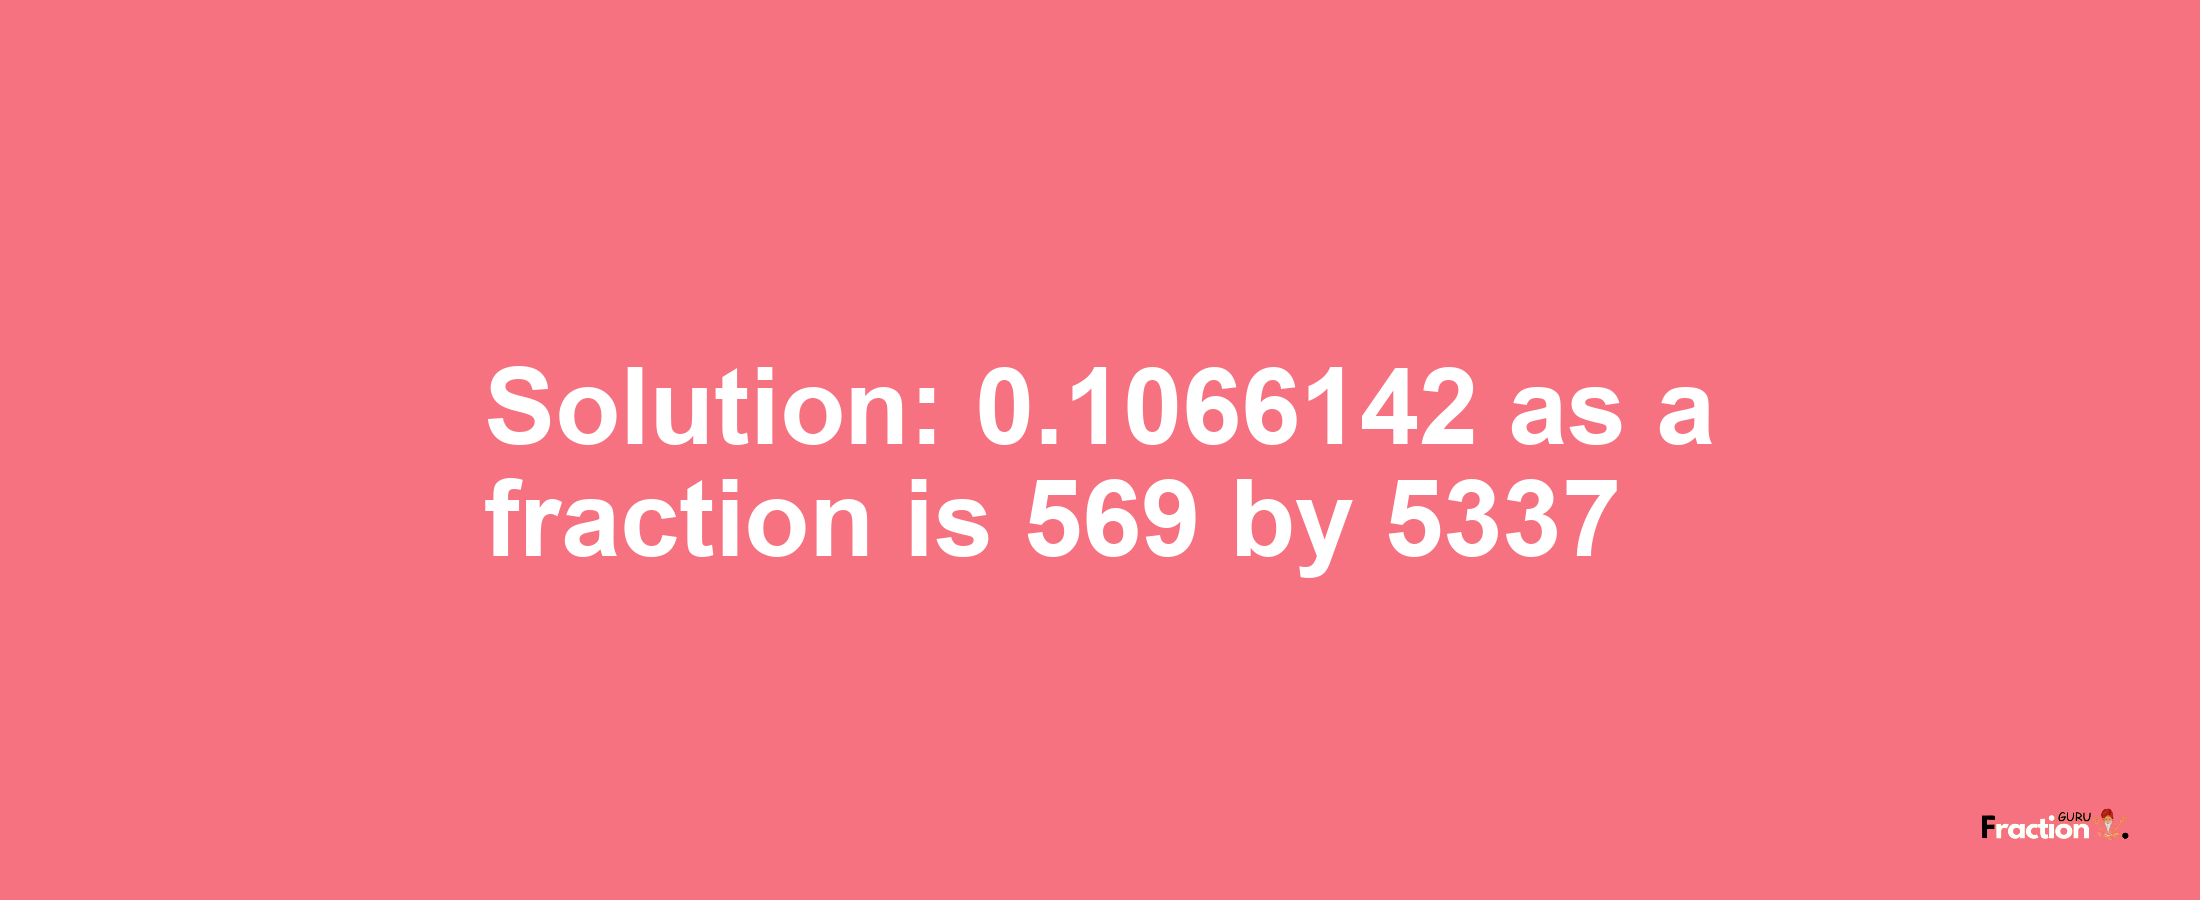 Solution:0.1066142 as a fraction is 569/5337